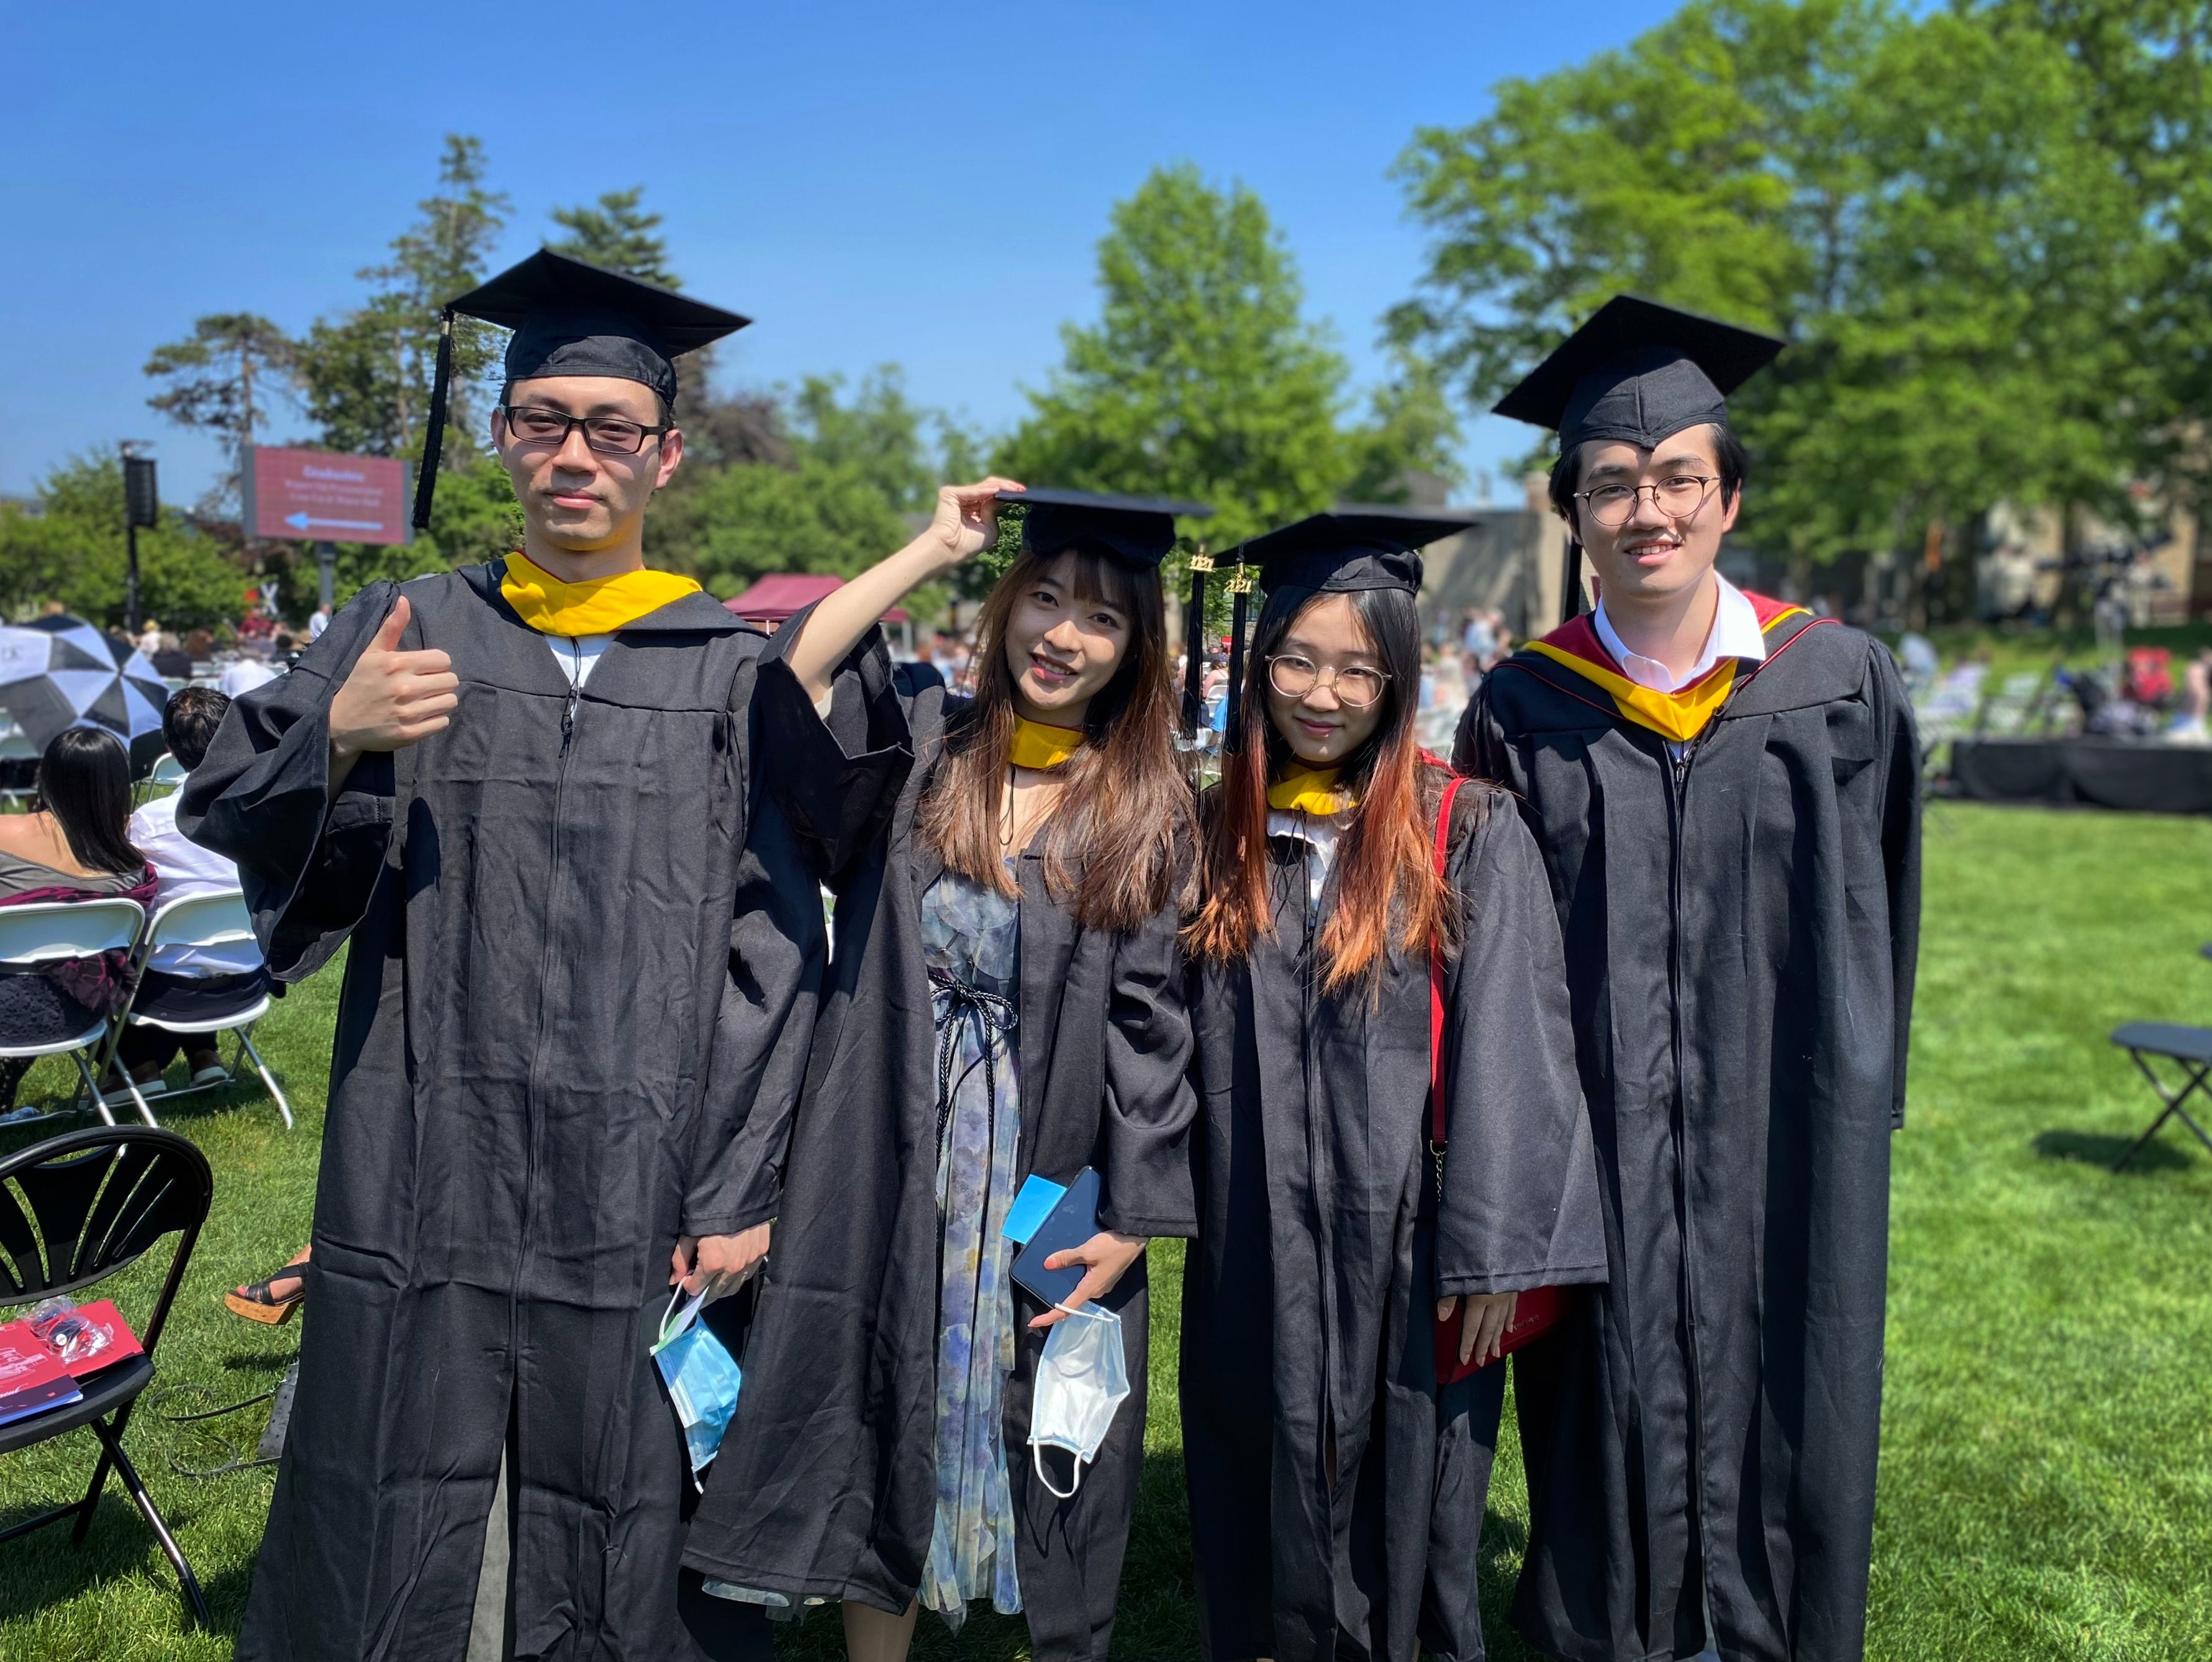 Four graduating Asian students posing together.